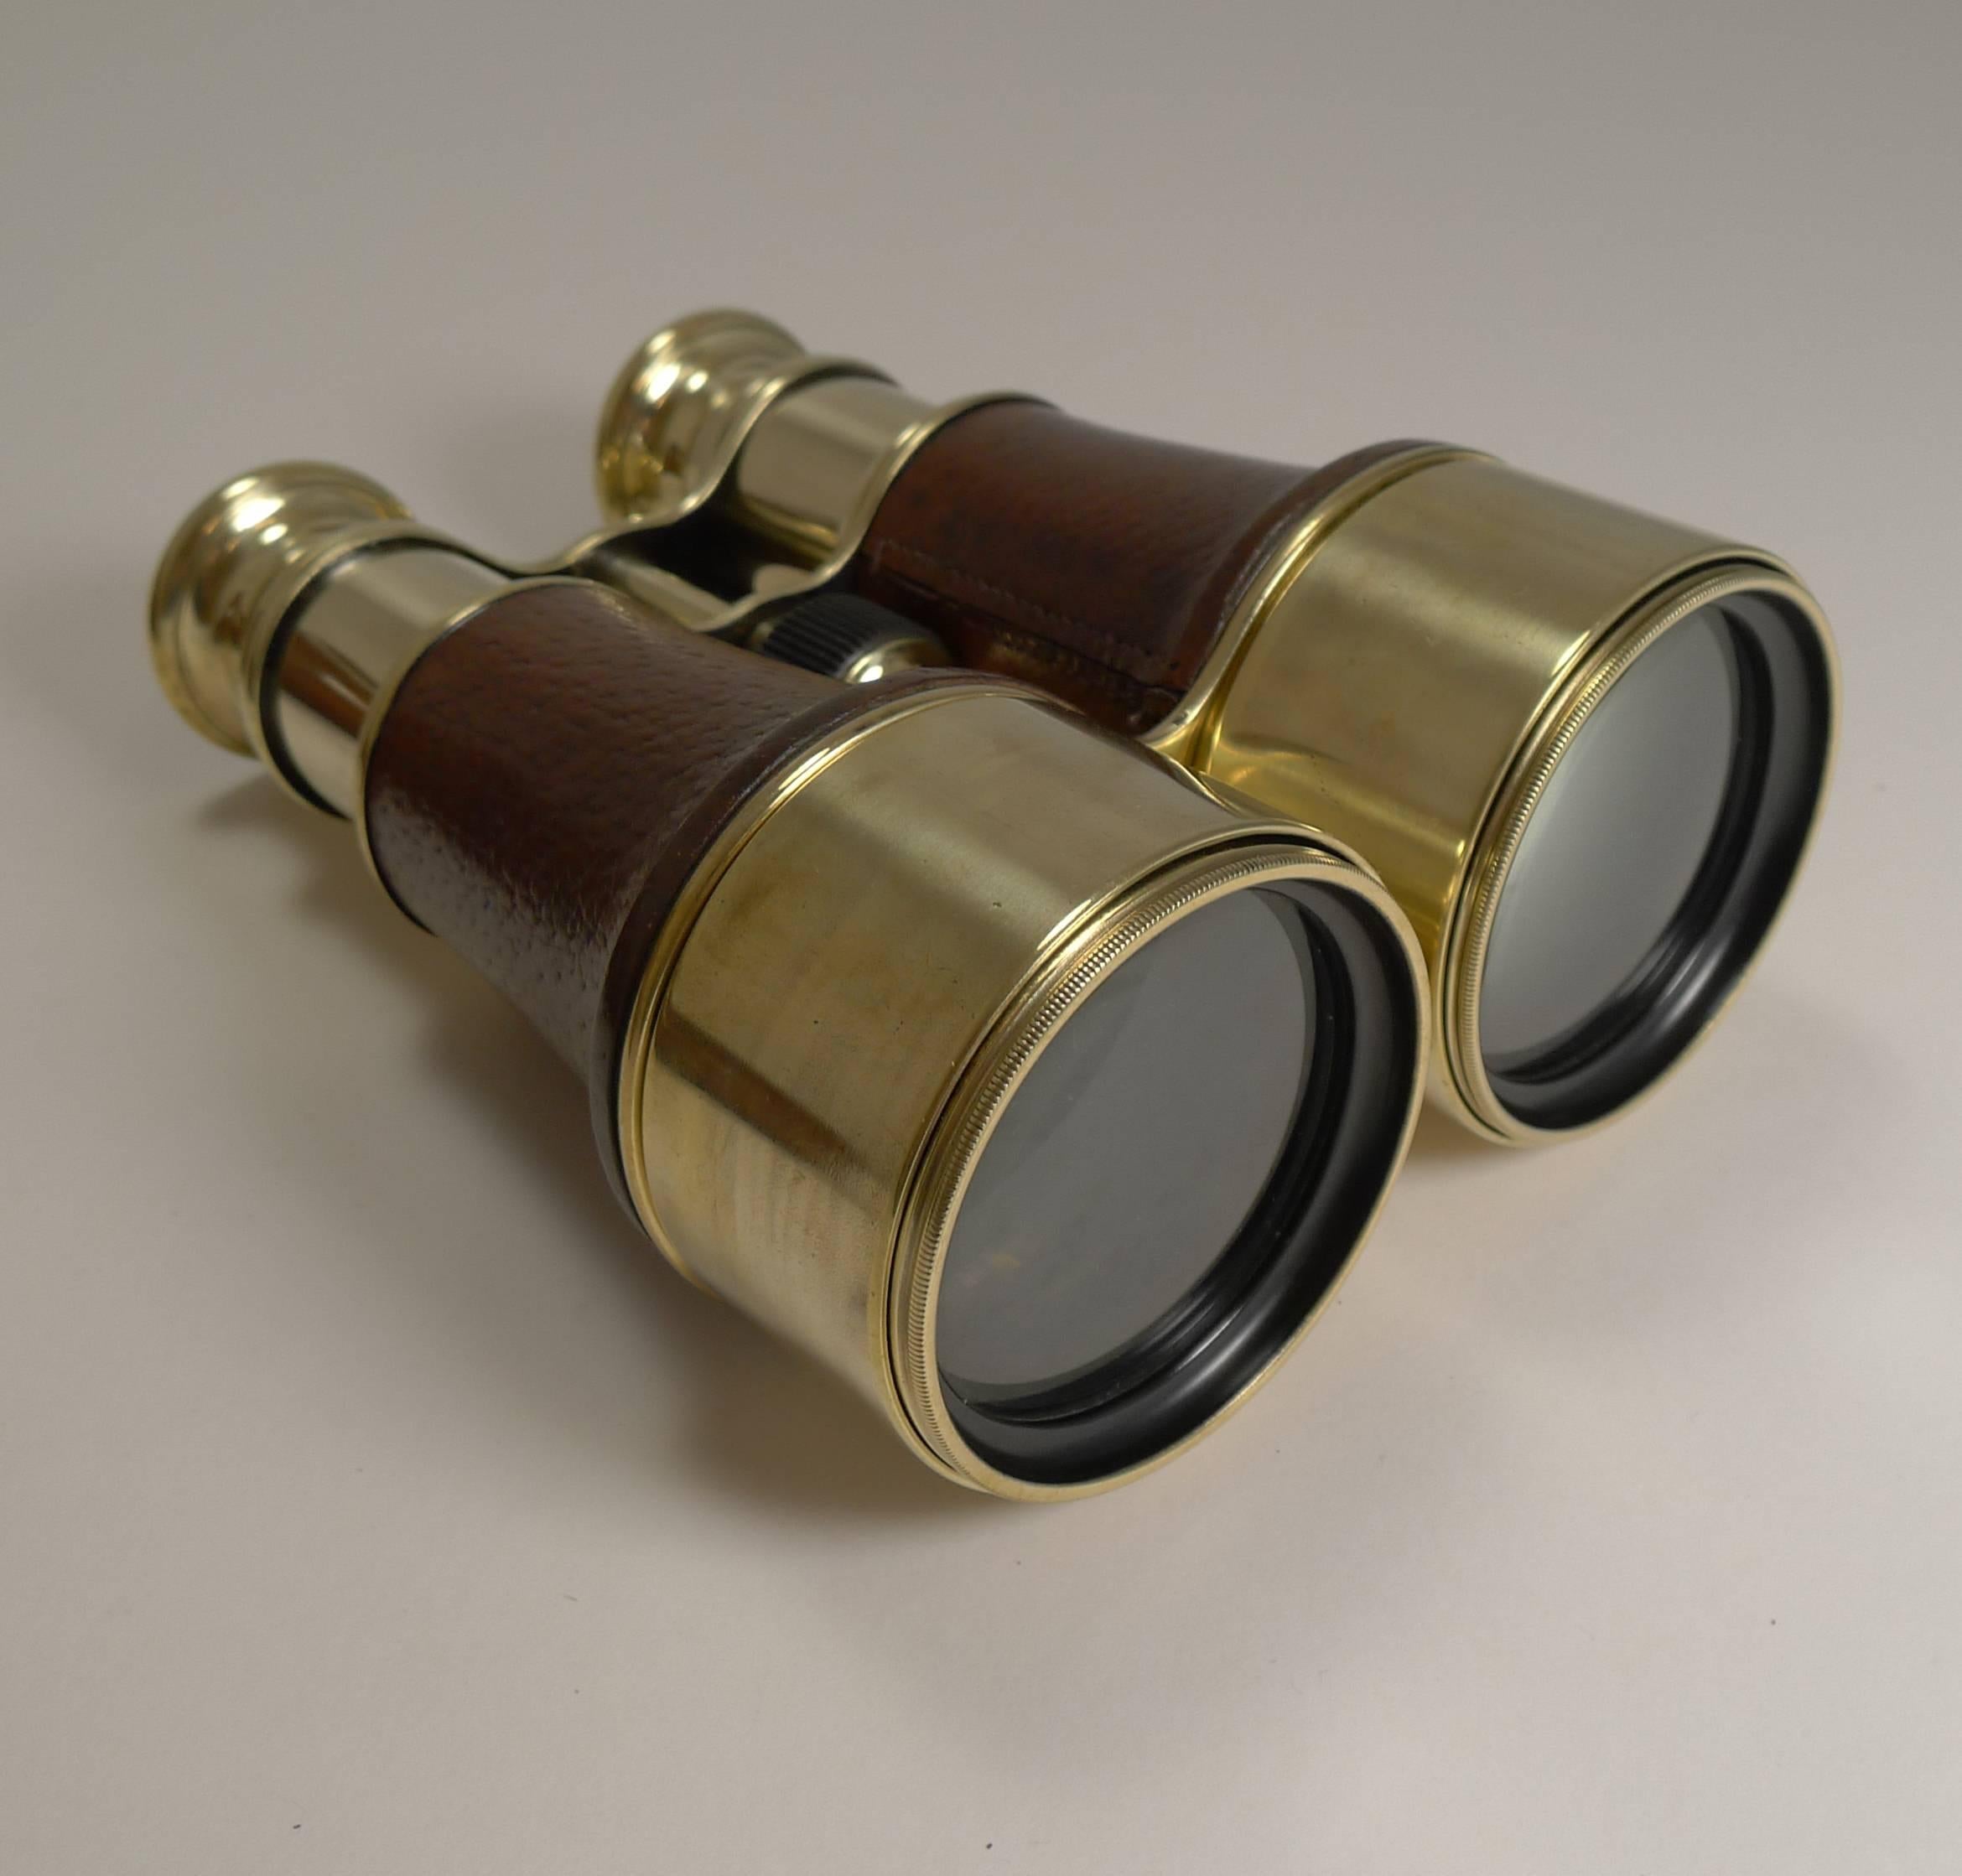 Brass Superb Pair of WW1 Binoculars and Case, British Officer's Issue, 1916 Signed